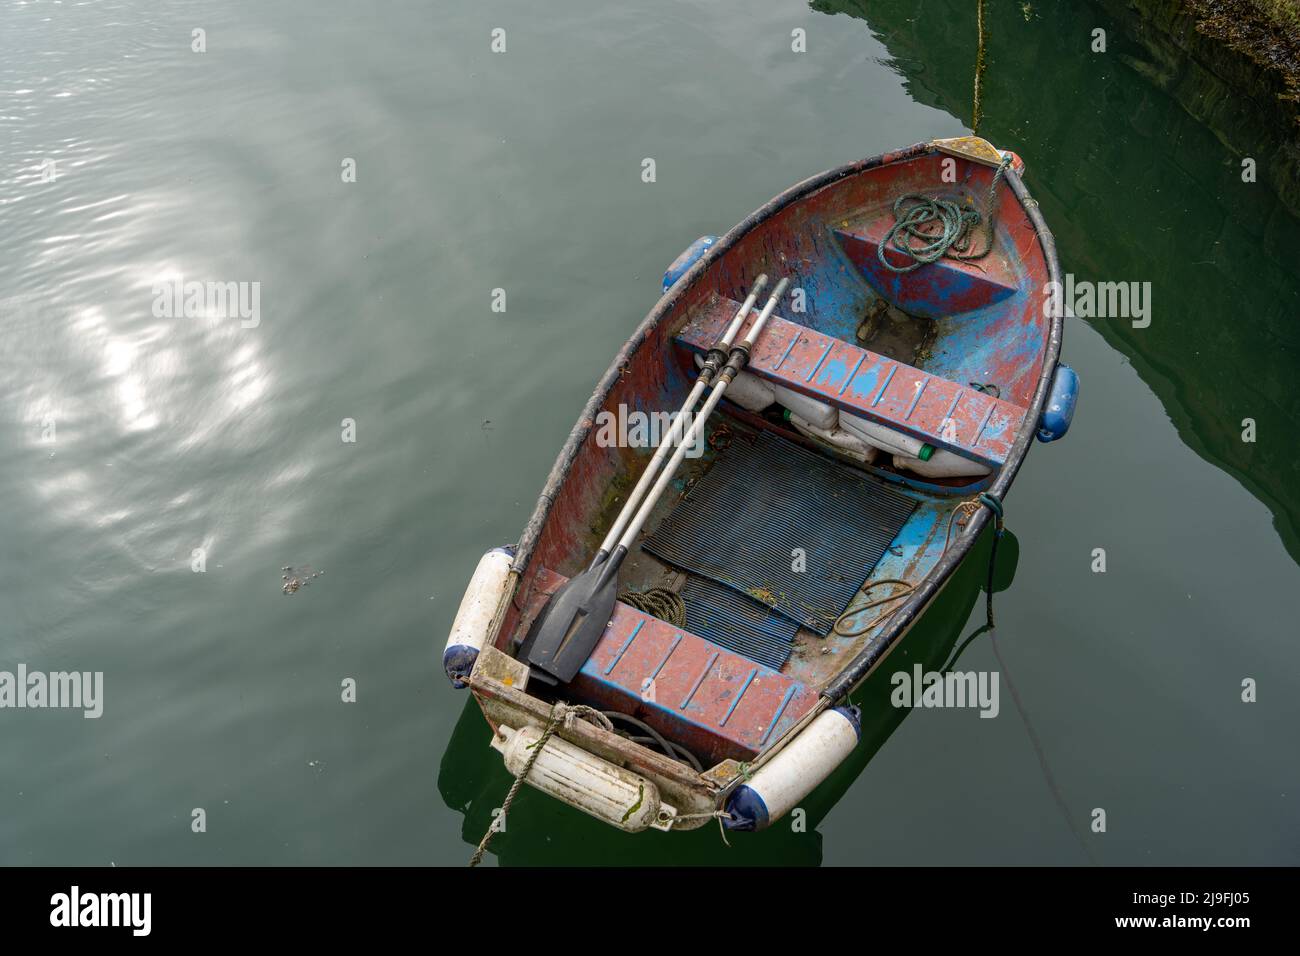 A small boat or skiff, used for sculling in a harbour. Stock Photo